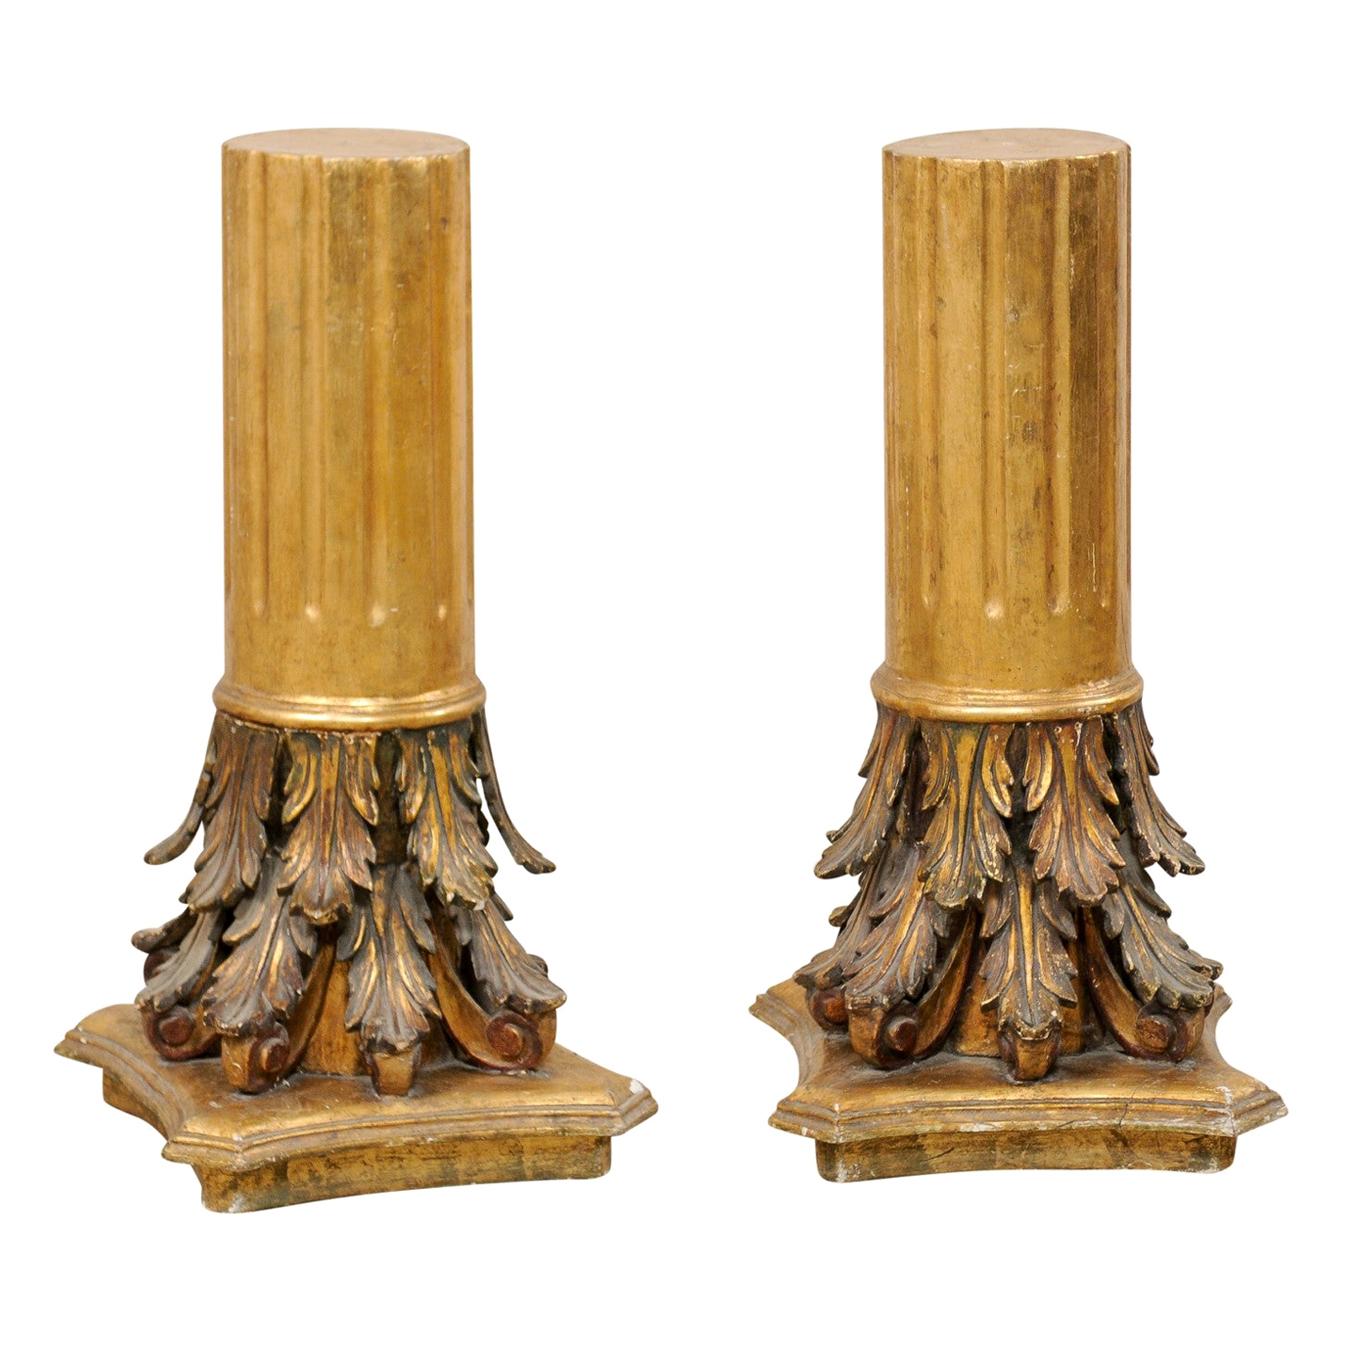 Antique Italian Pair of Roman Cointhian Style Carved & Giltwood Pedestals